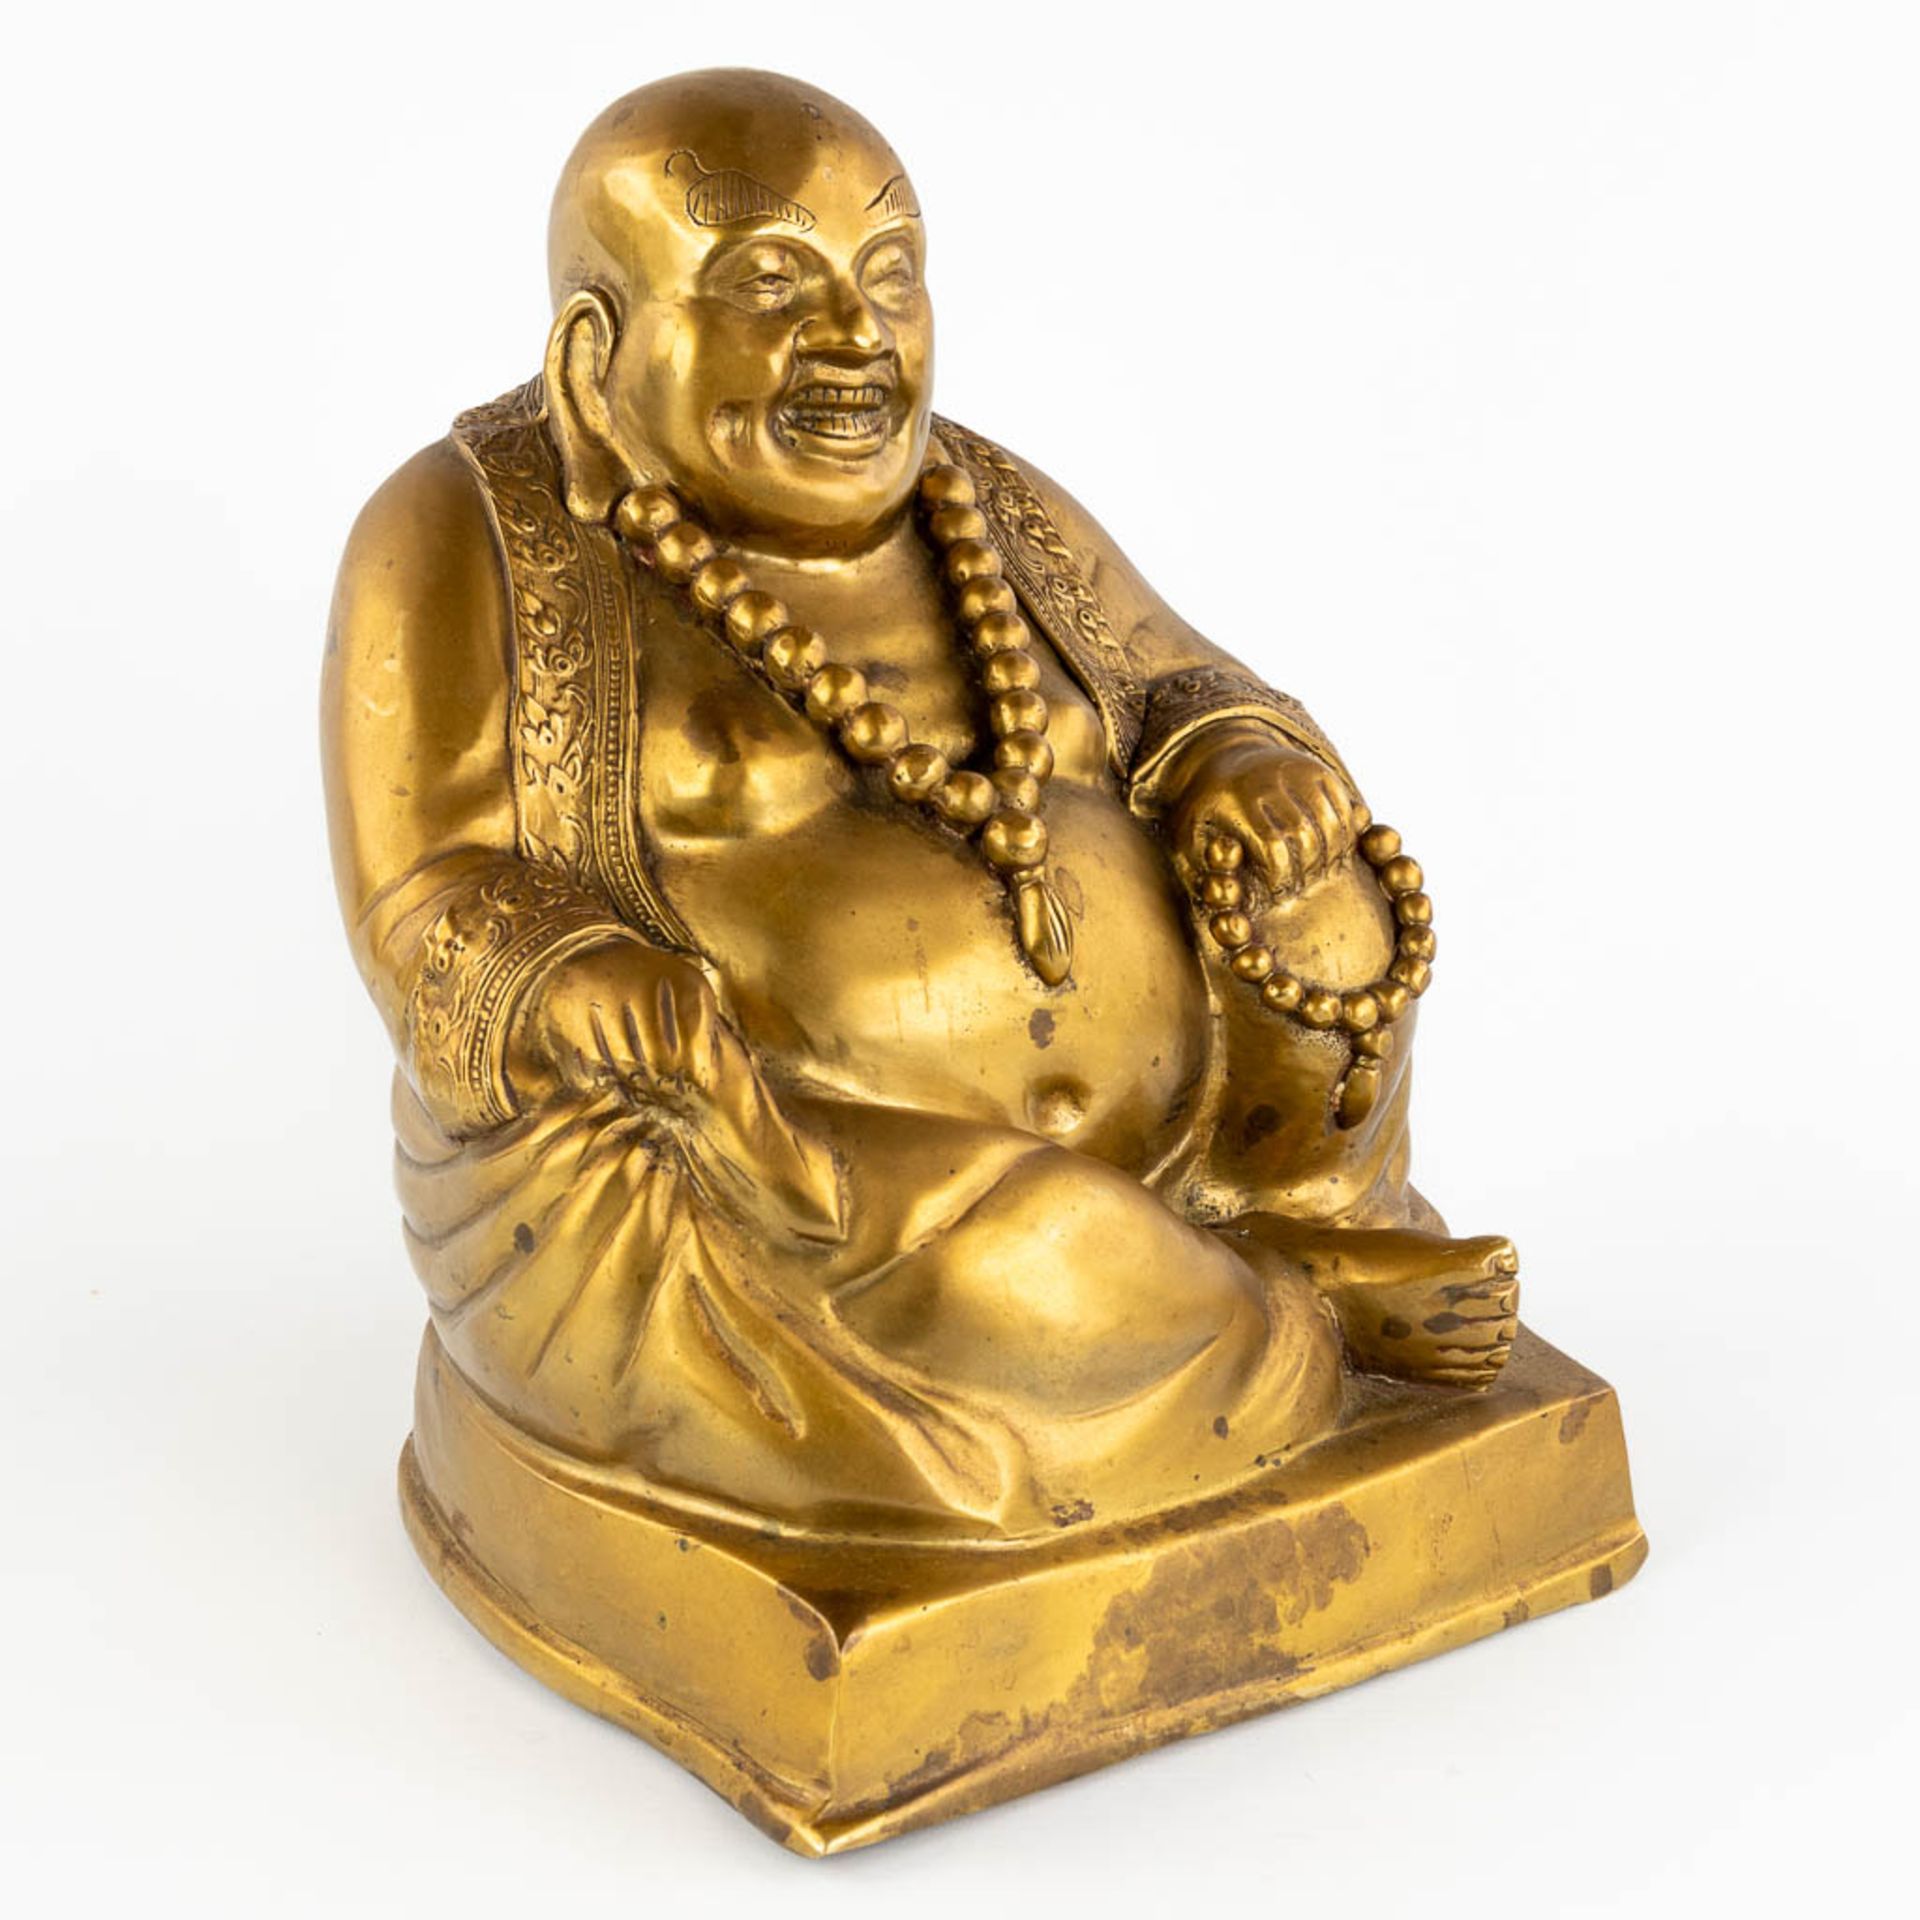 A Chinese laughing buddha, polished bronze. (L:27 x W:27 x H:34 cm) - Image 3 of 11